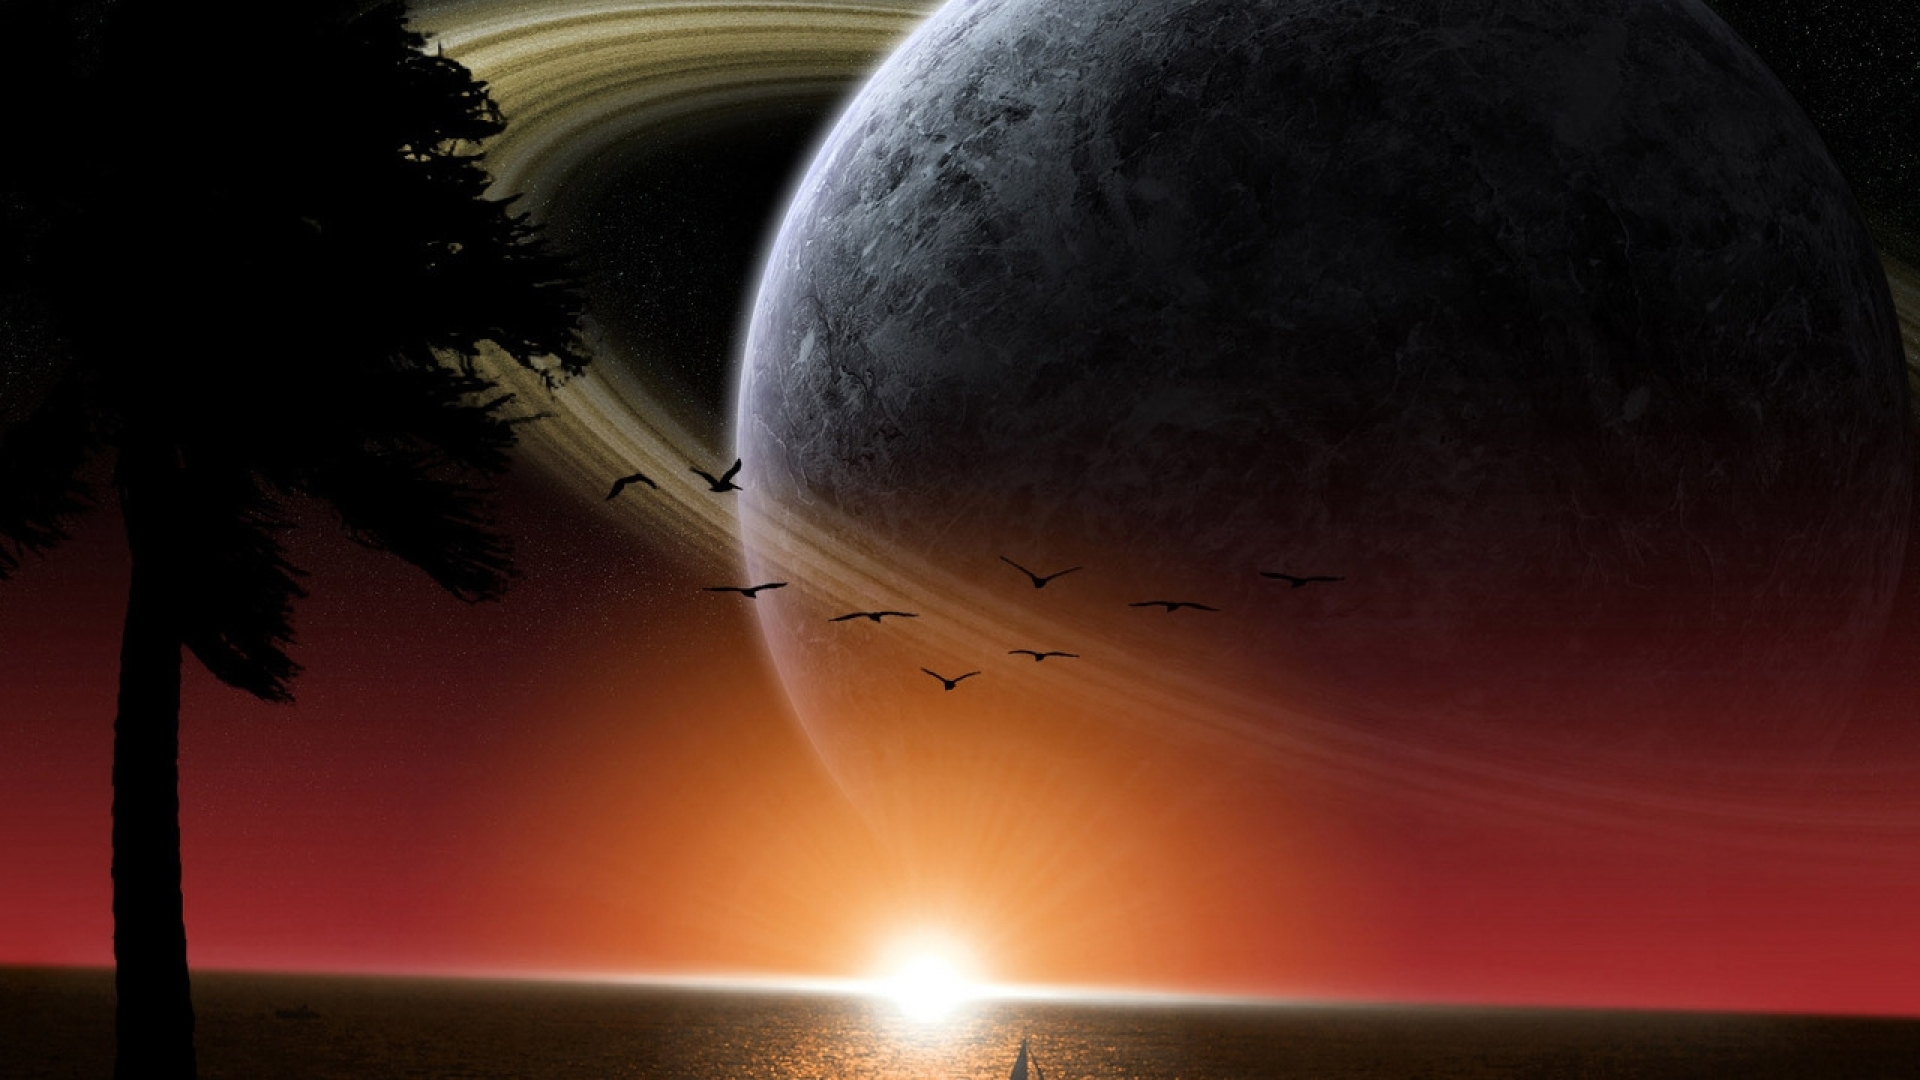 Awesome Planet - HD Wallpaper 